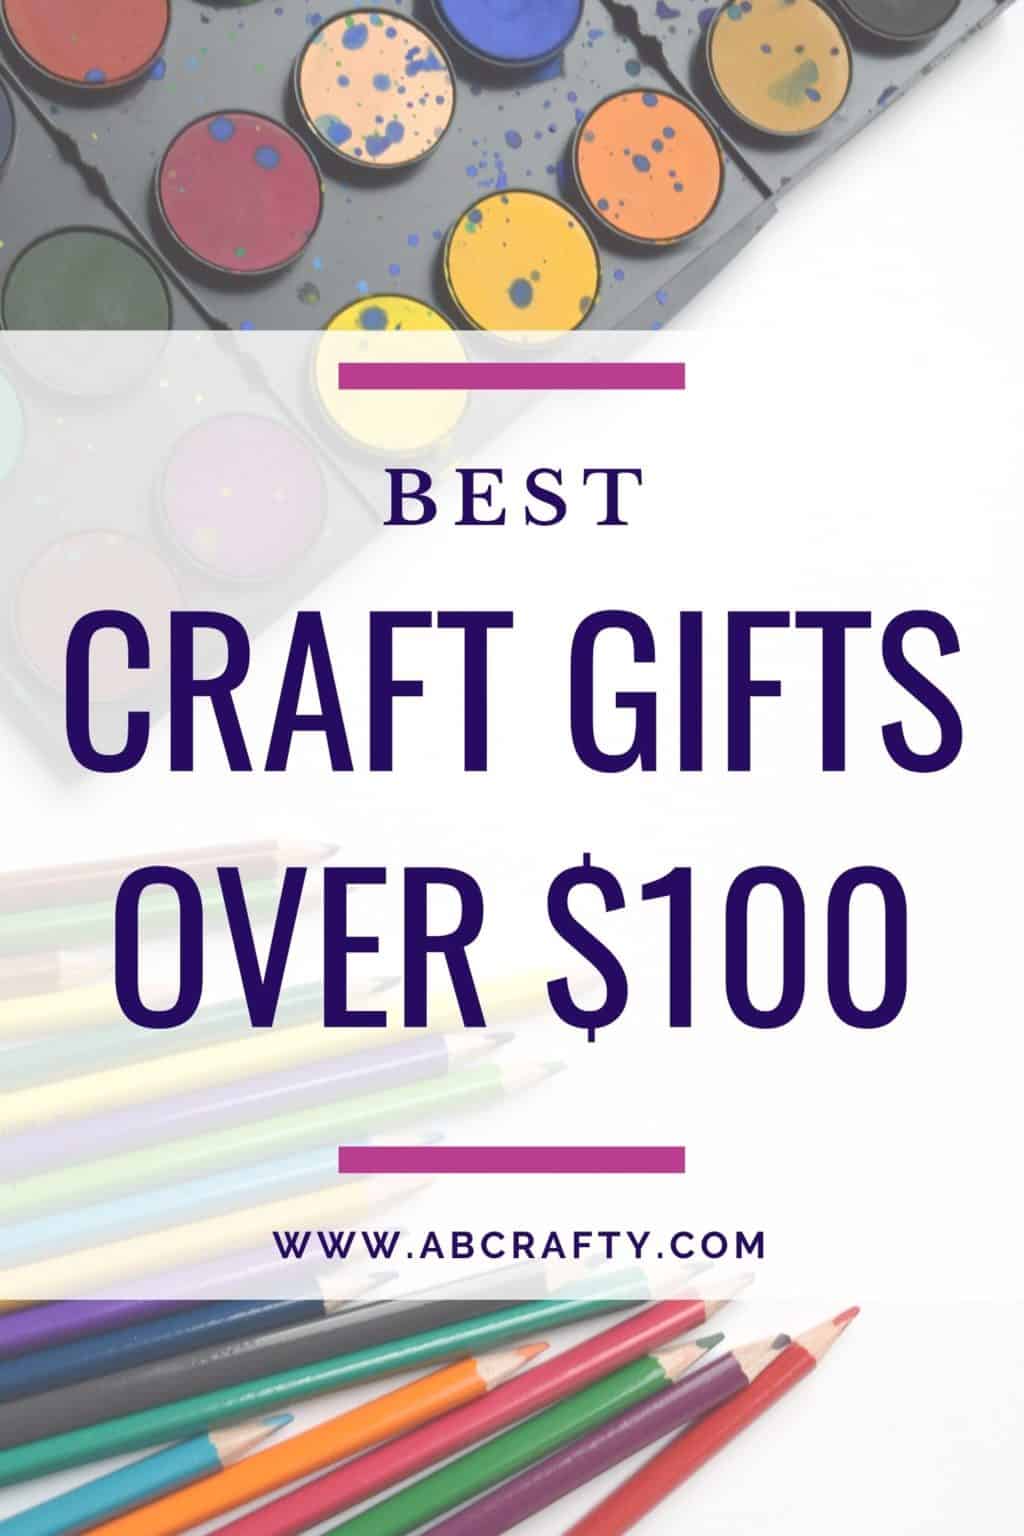 Young Adults and Beyond Crafty Gift Ideas (Series) – DFW Craft Shows